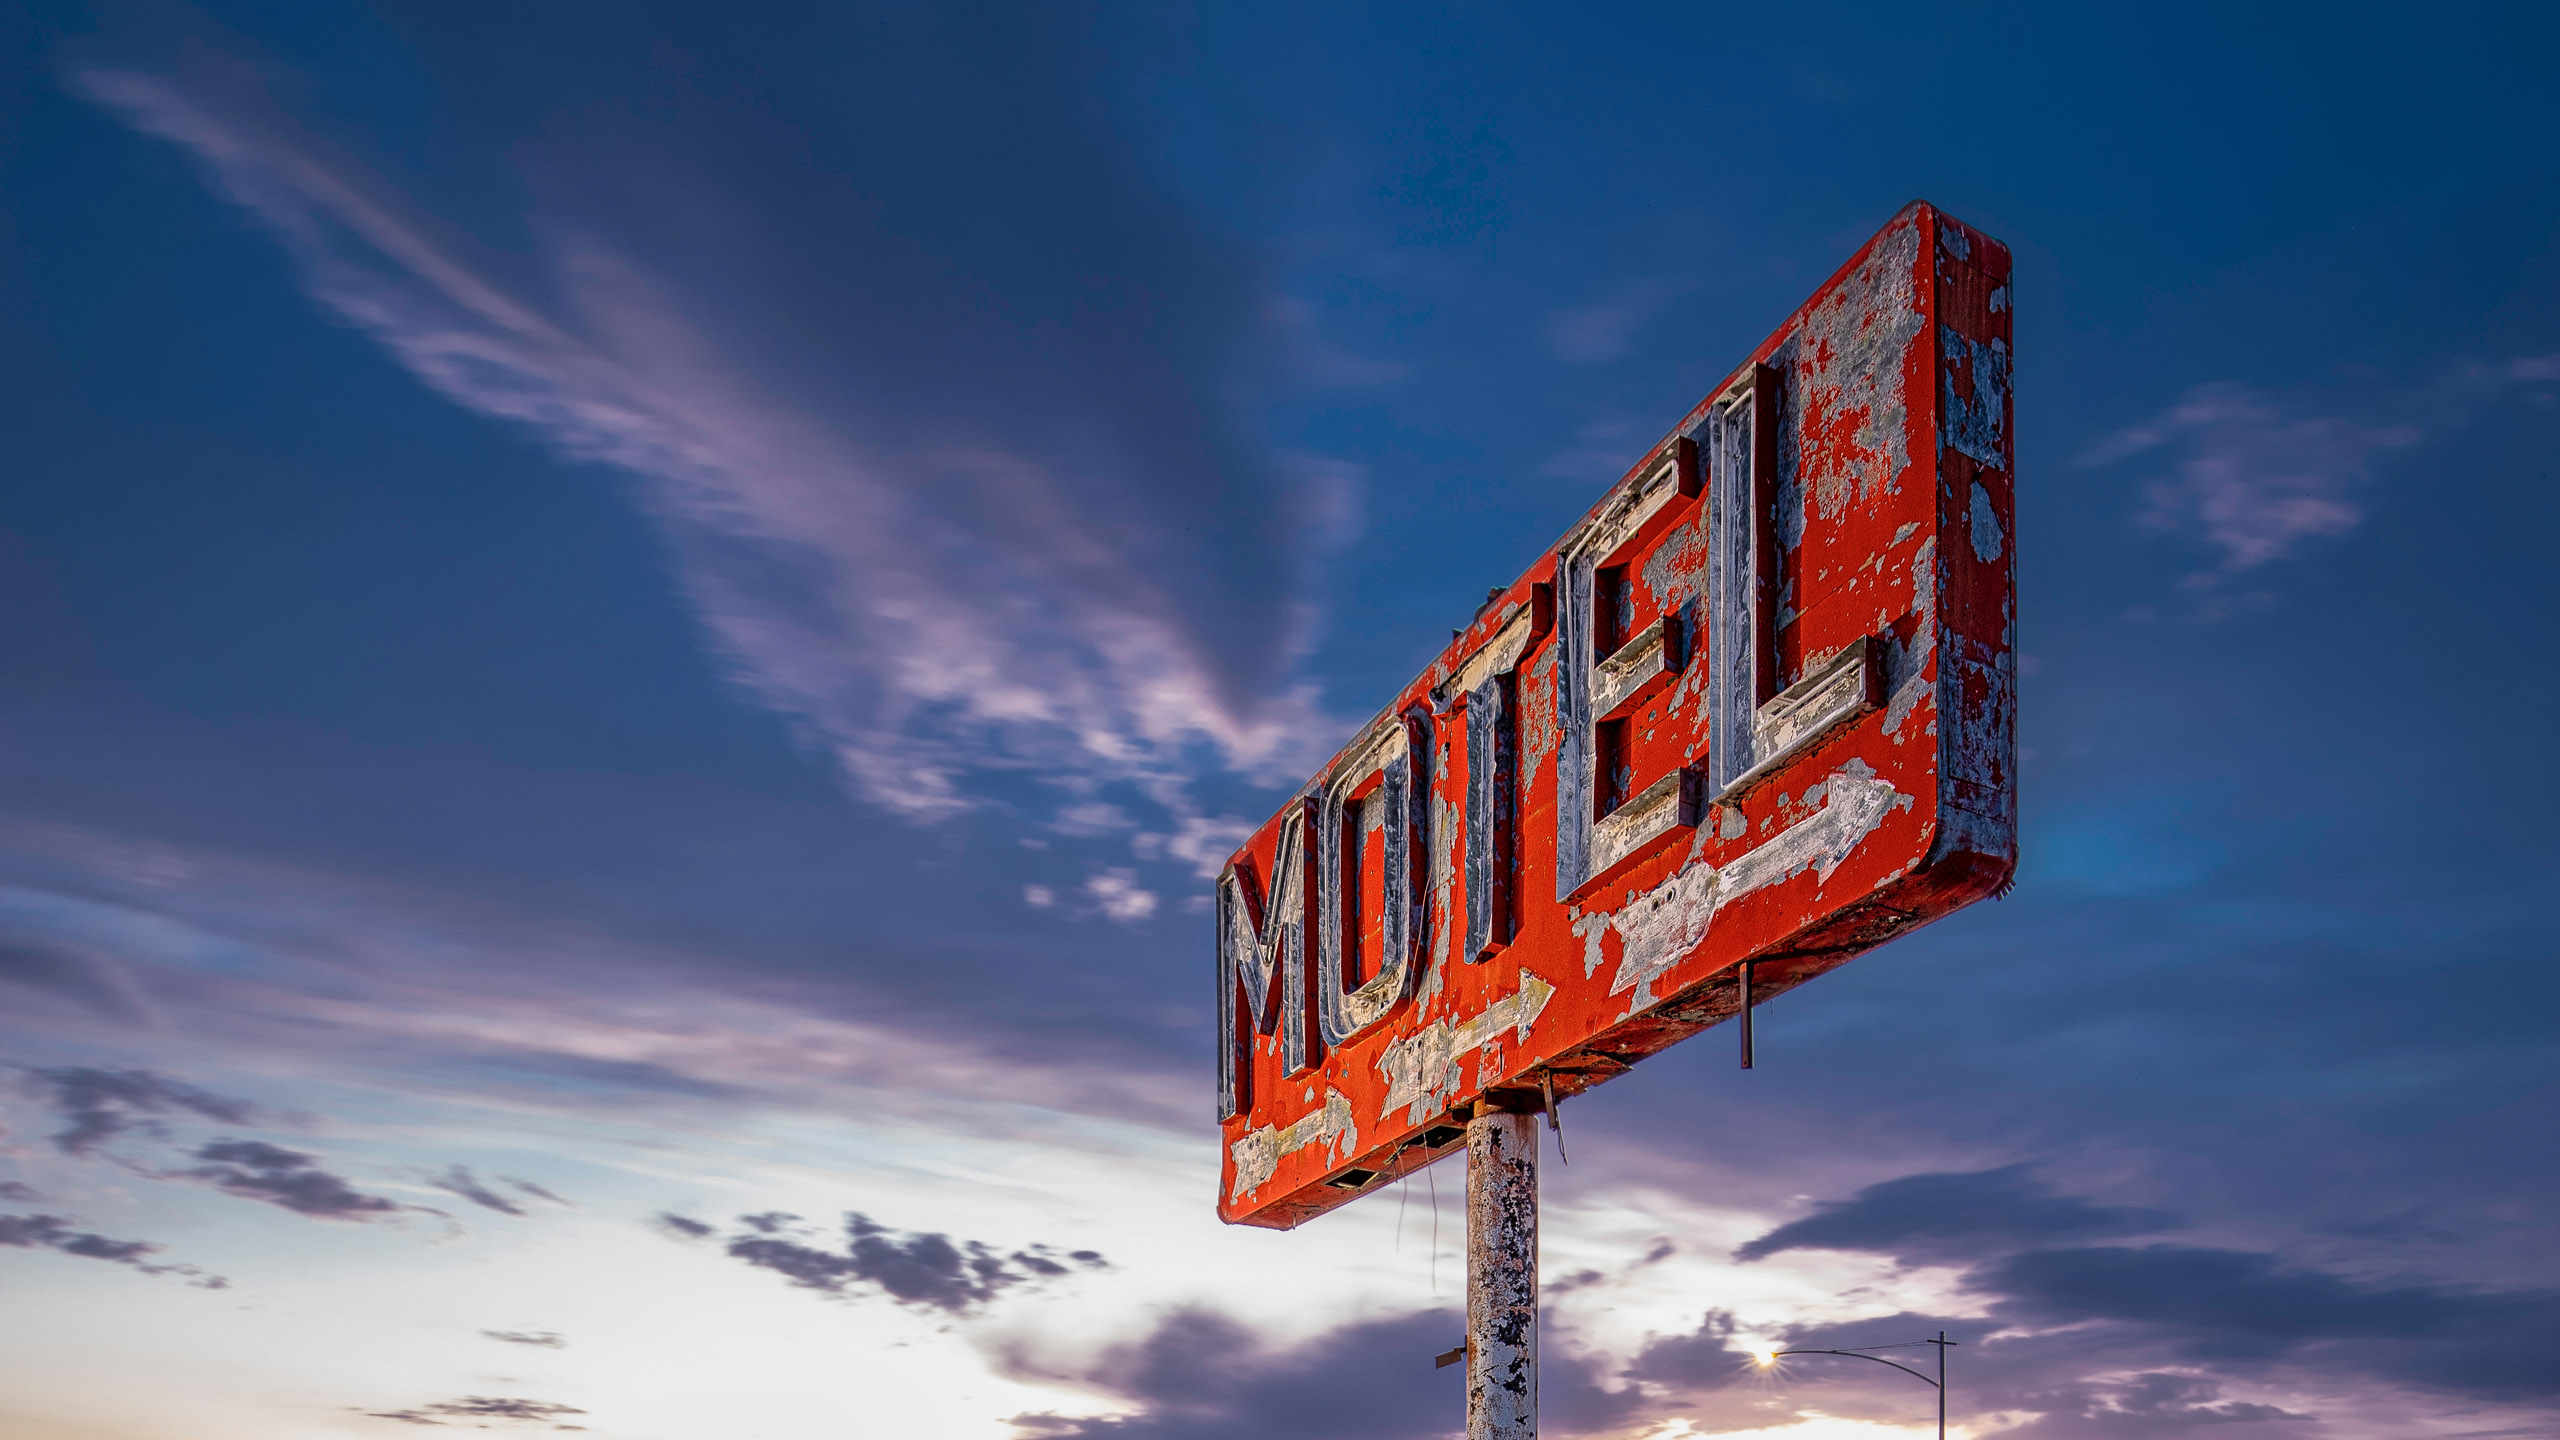 4351_kenlee_route66-mojave_210622_2031_20sf14iso00_yucca-motel-sign-blue-hour-sunset_HEADER-PHOTOFOCUS